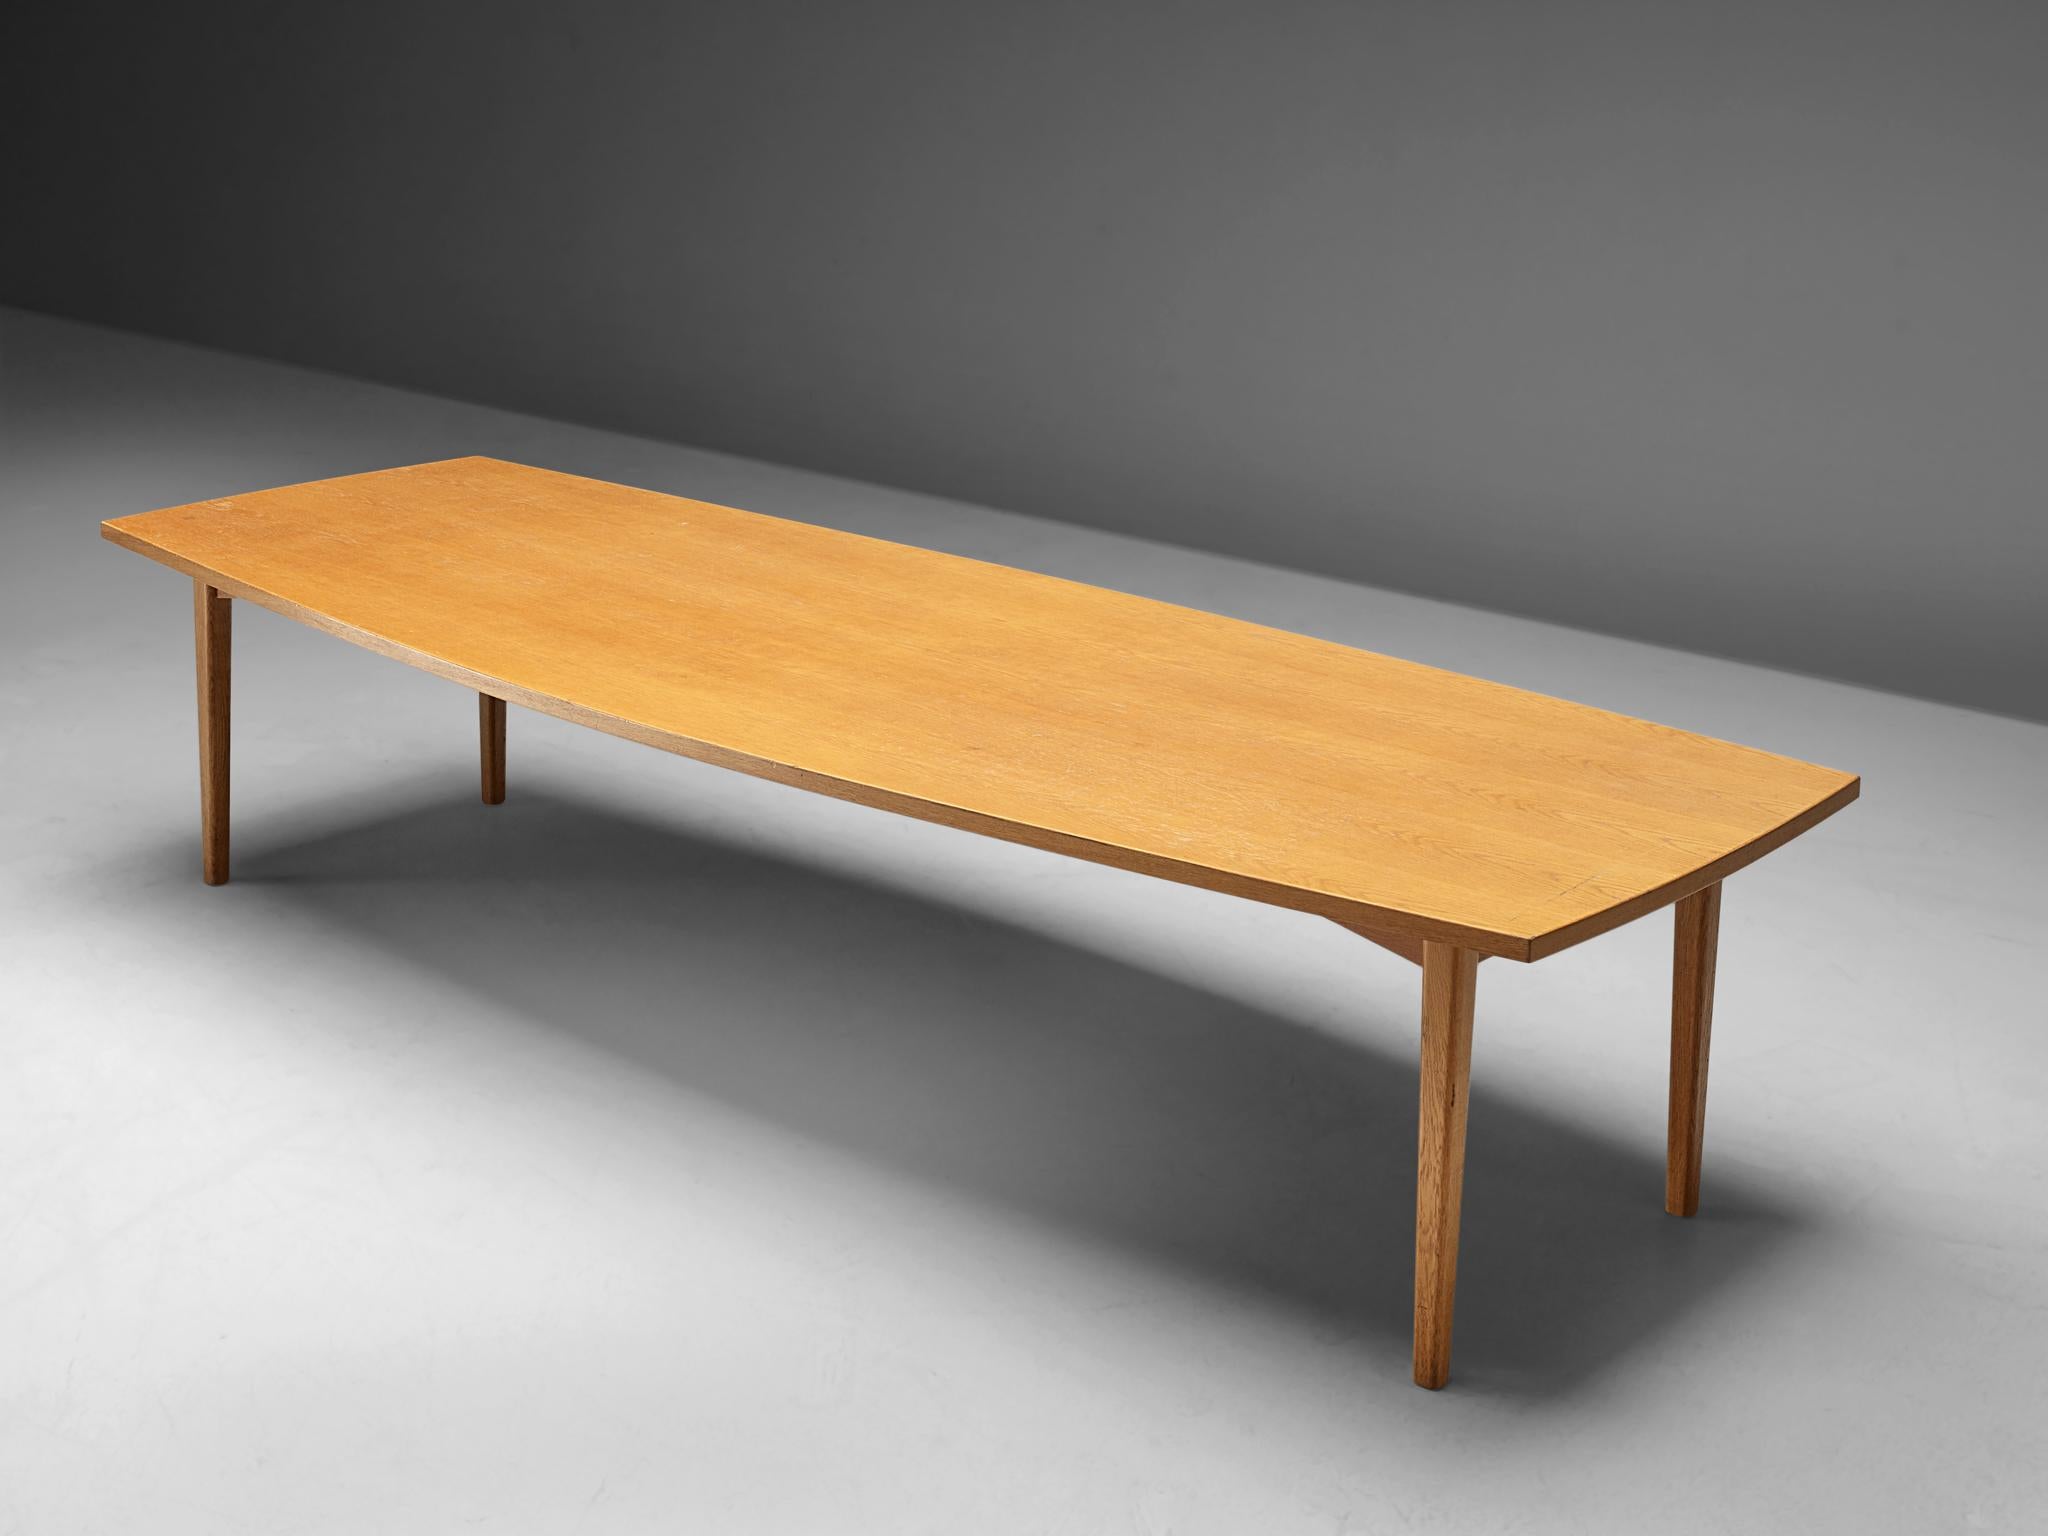 Conference table, oak, Denmark, 1950s.

A sizeable dining table executed in oak. The boat-shaped tabletop is made of one piece, featuring a beautiful grain. The base consists of four slender rounded rectangular legs that make the table incredibly